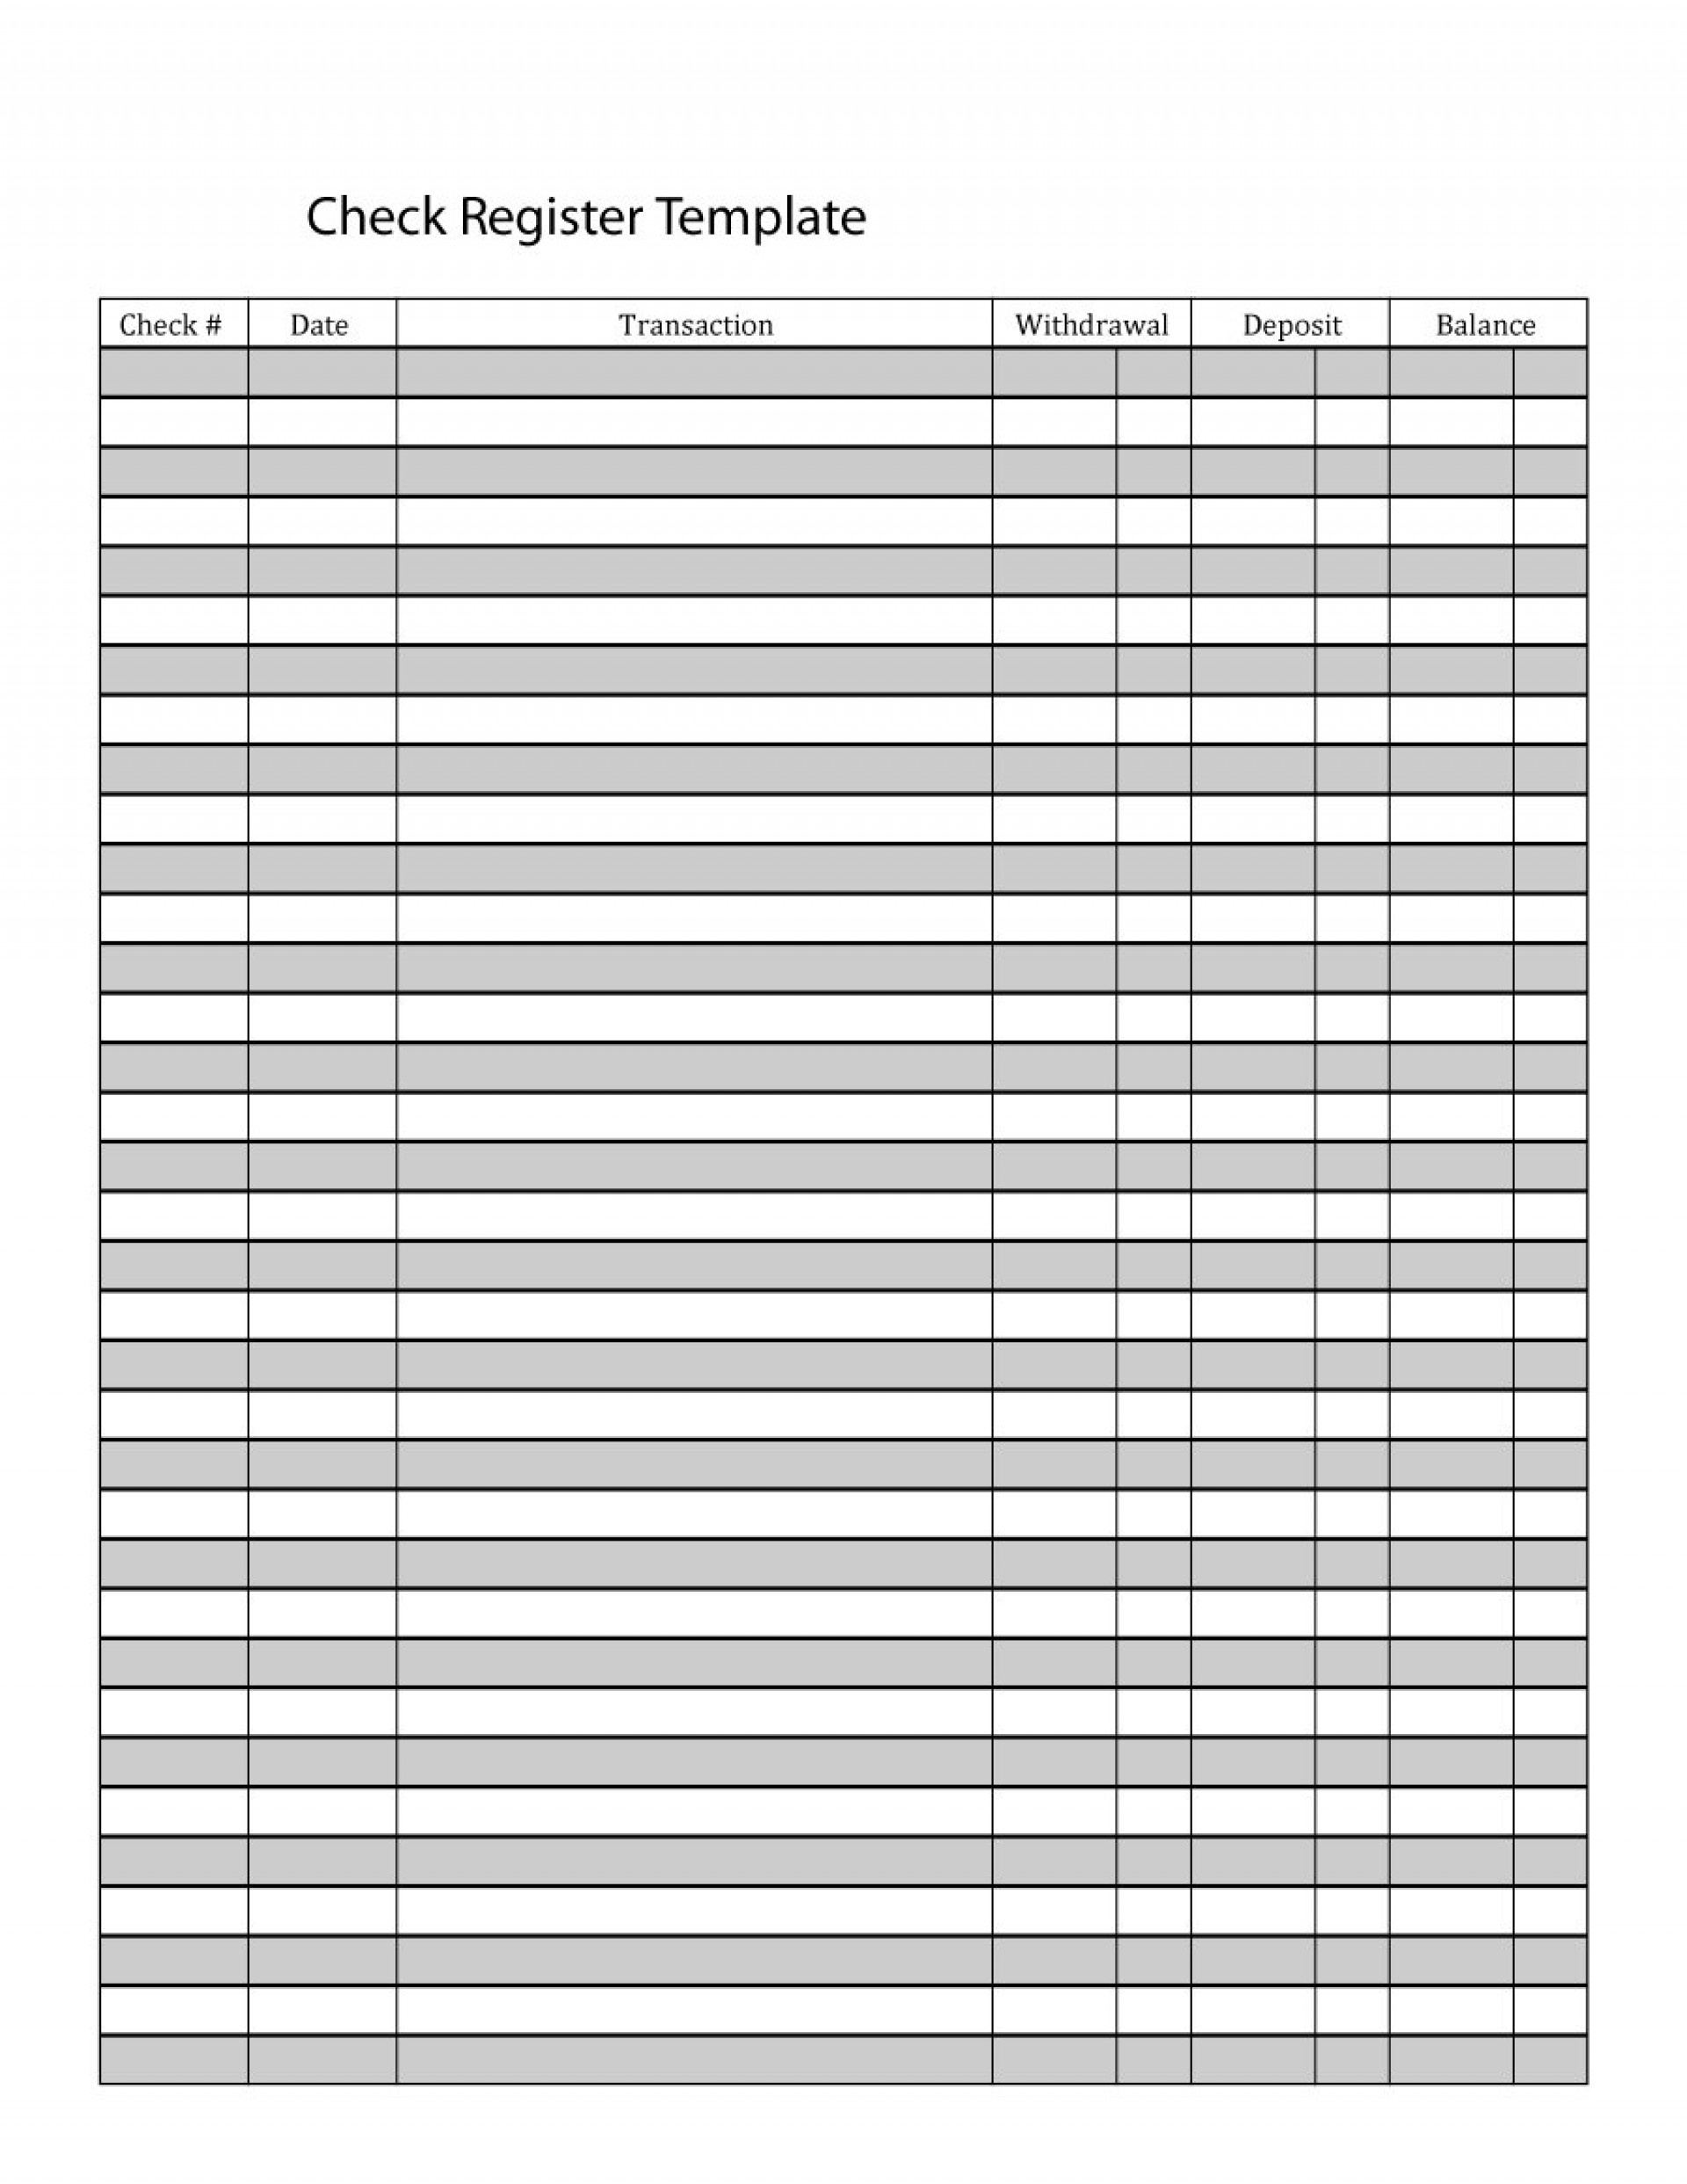 Excellent Blank Check Register Template Ideas Checkbook Free Bank - Free Printable Blank Check Register Template